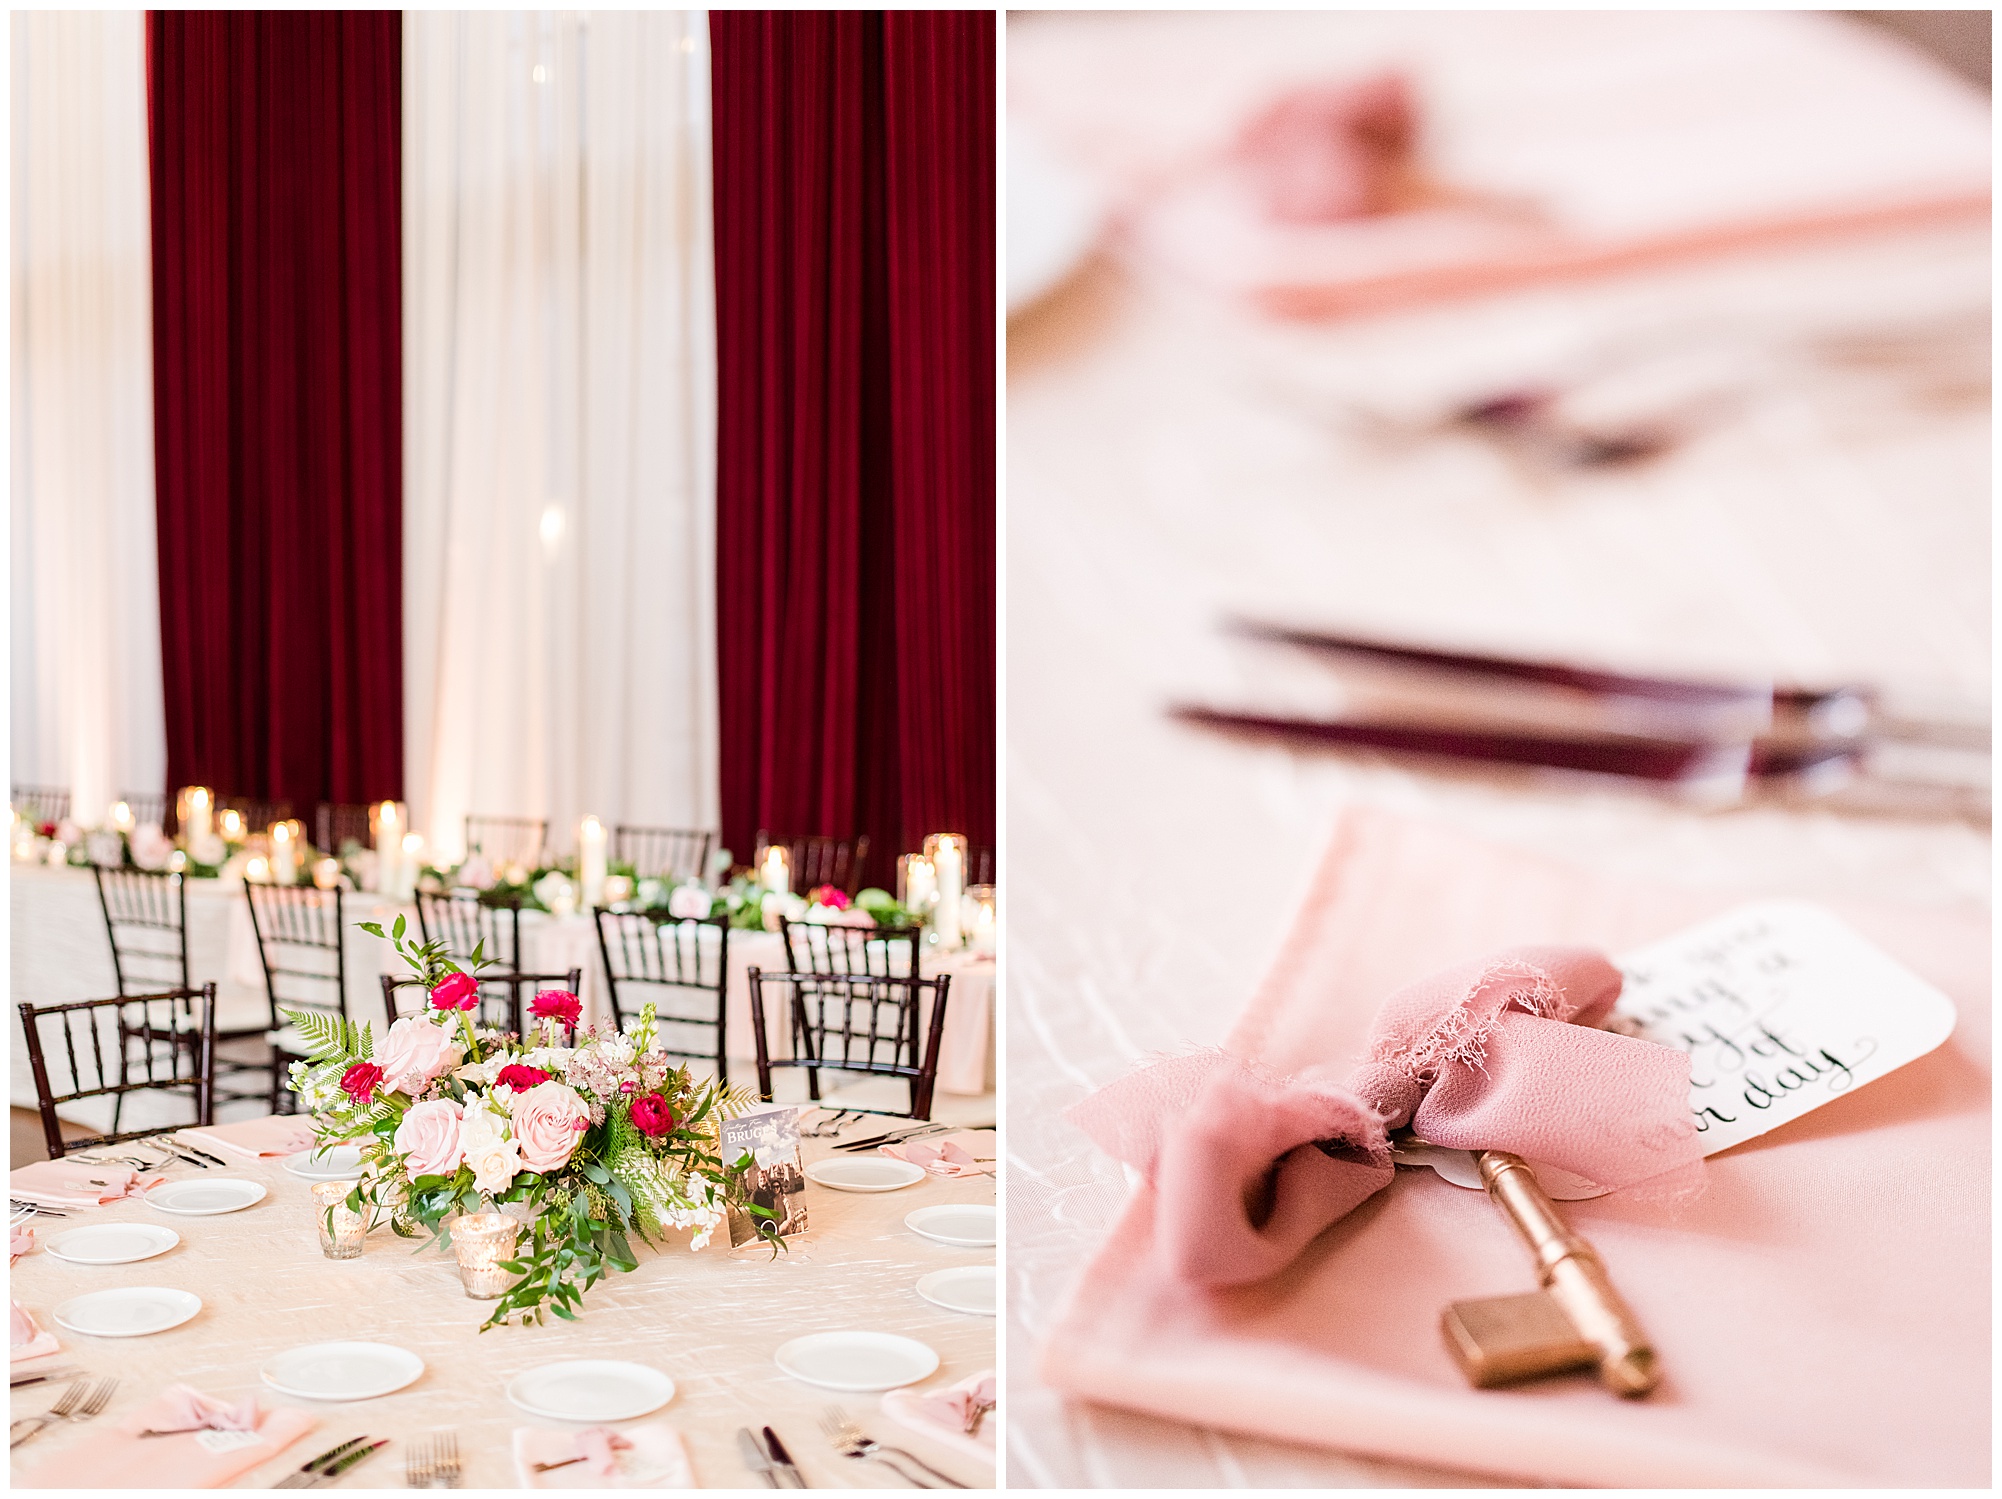 fairytale wedding reception at dover hall in pink and cream. by richmond rva wedding photographer, sarah & dave photography.